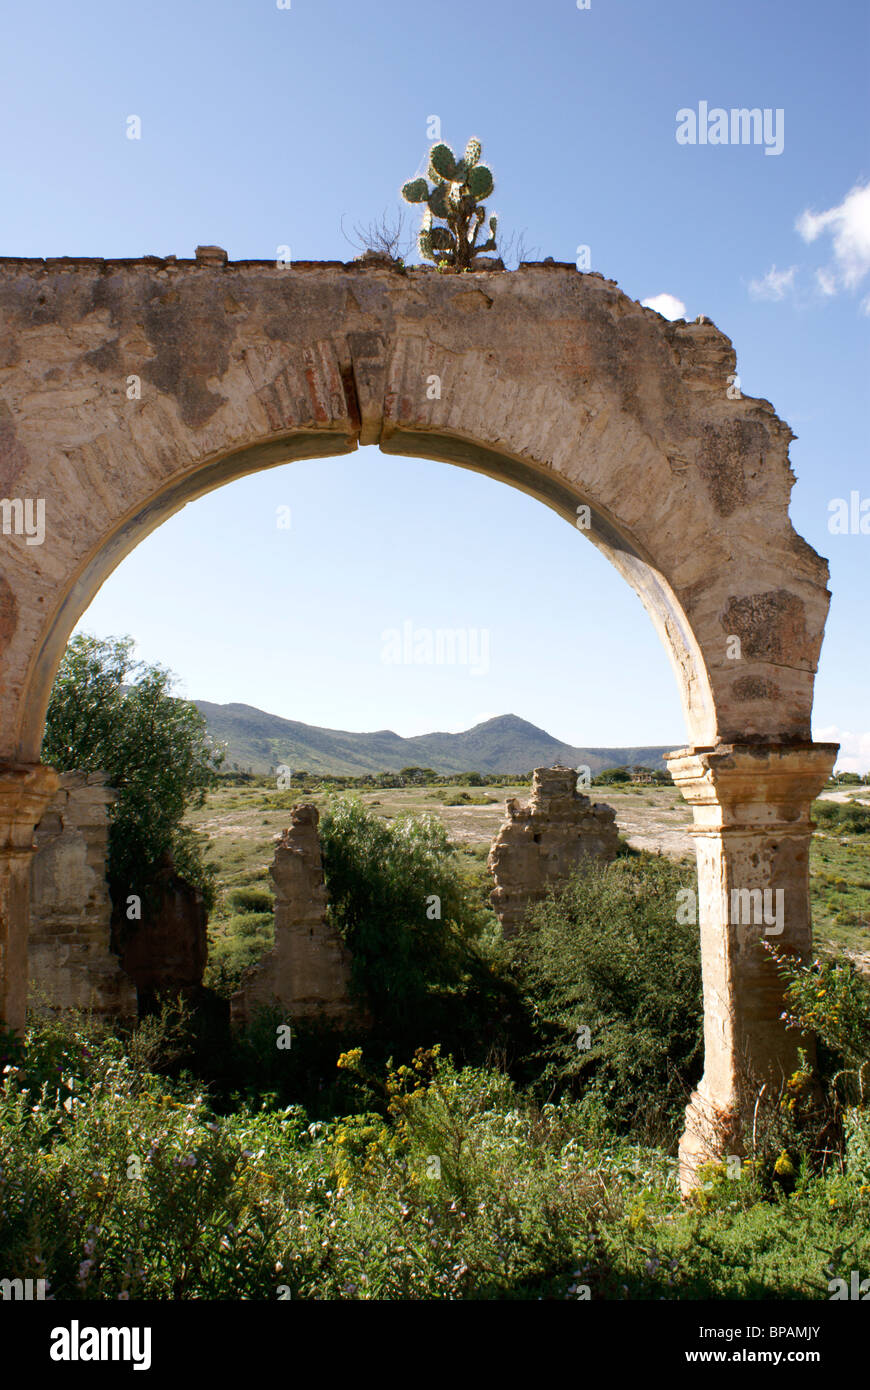 Mine ruins and landscape in the 19th century mining town of Mineral de Pozos, Guanajuato state, Mexico Stock Photo